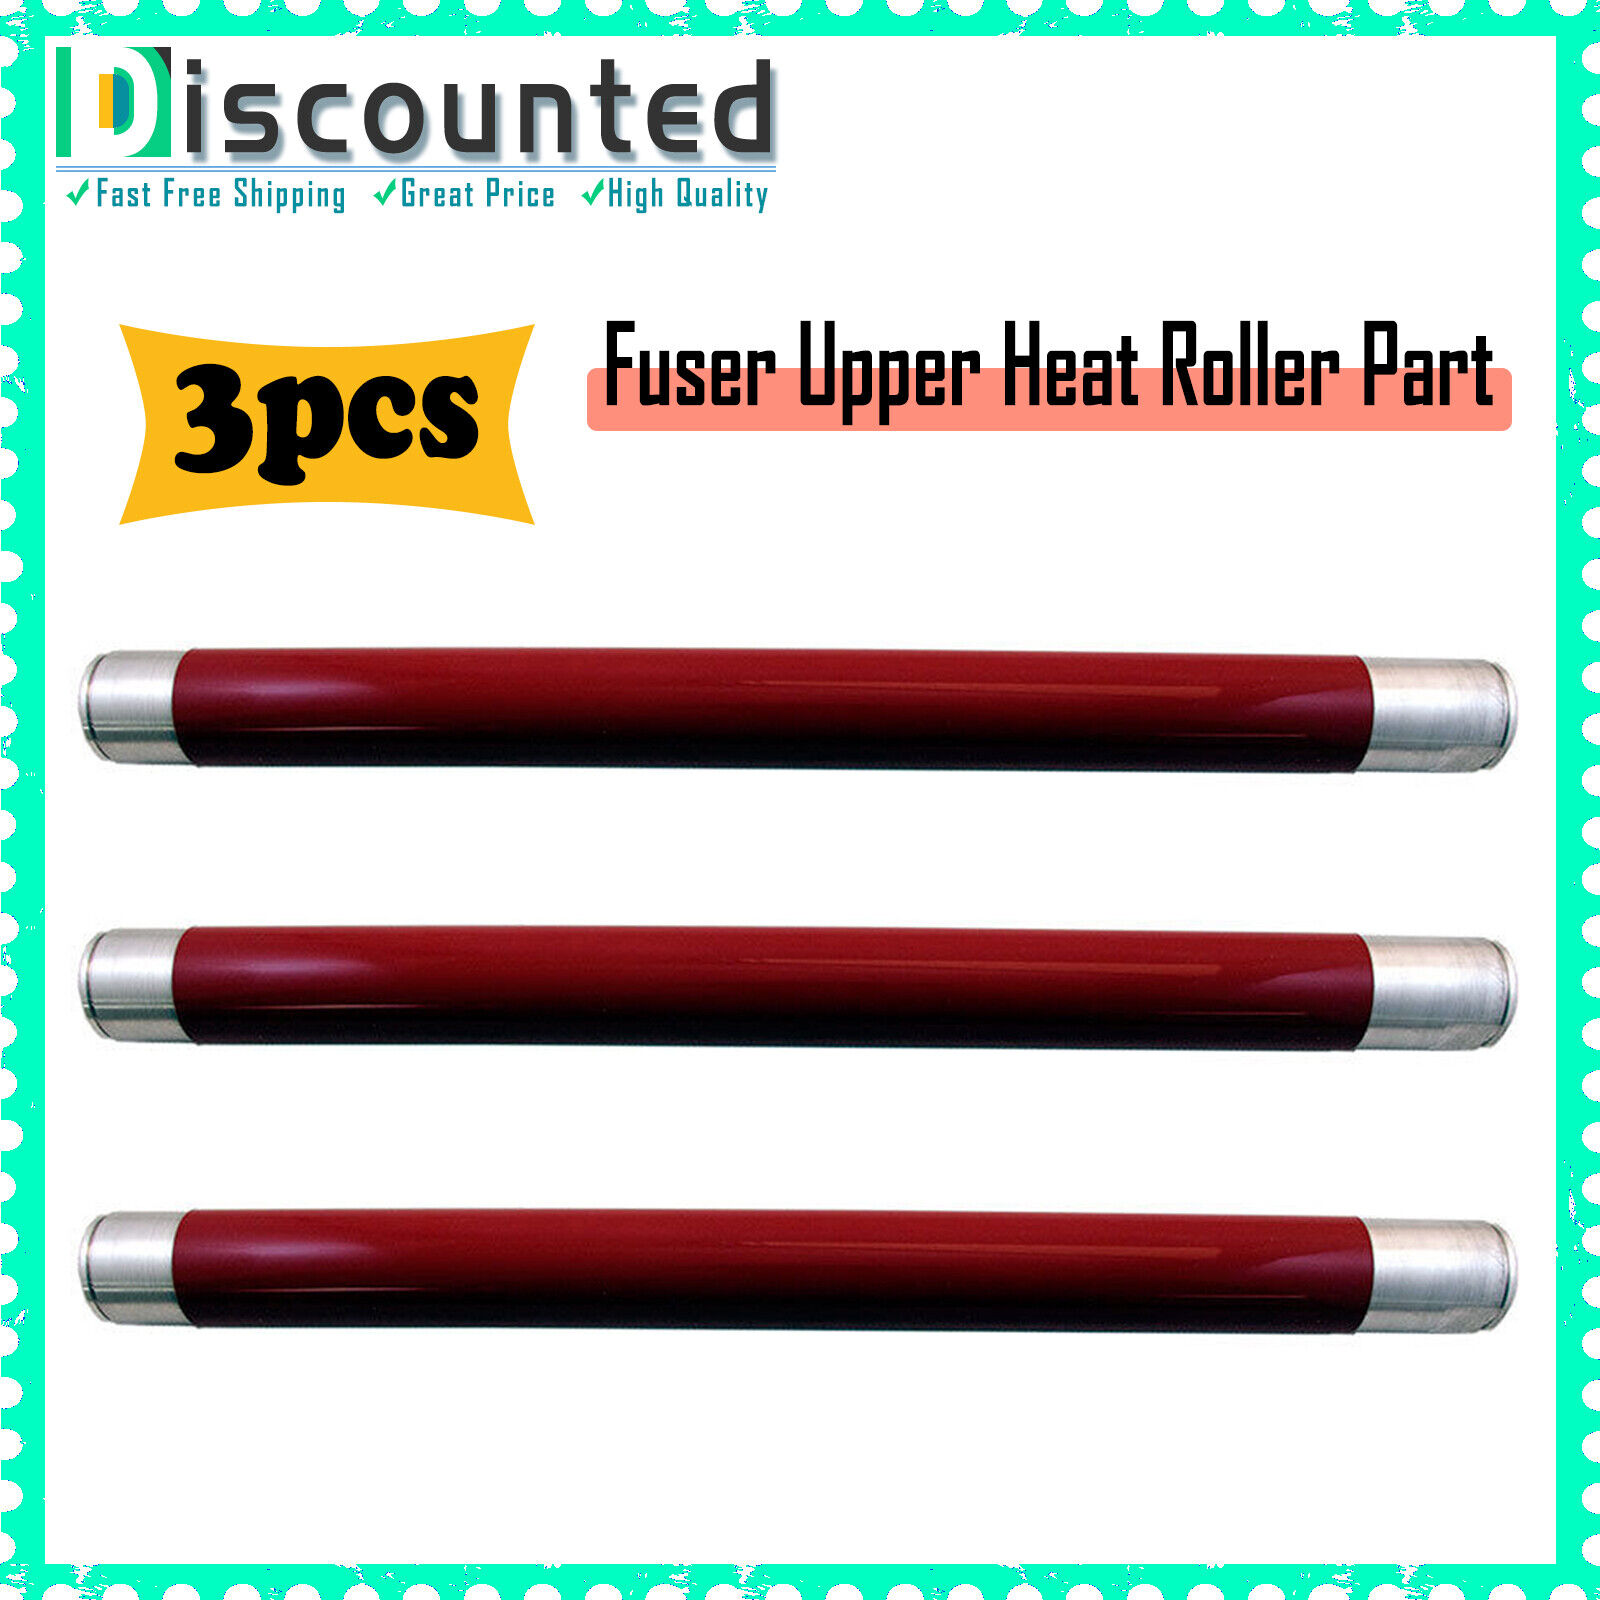 3PCS New Fuser Upper Heat Roller Part for Xerox DocuColor 240 242 250 252 260